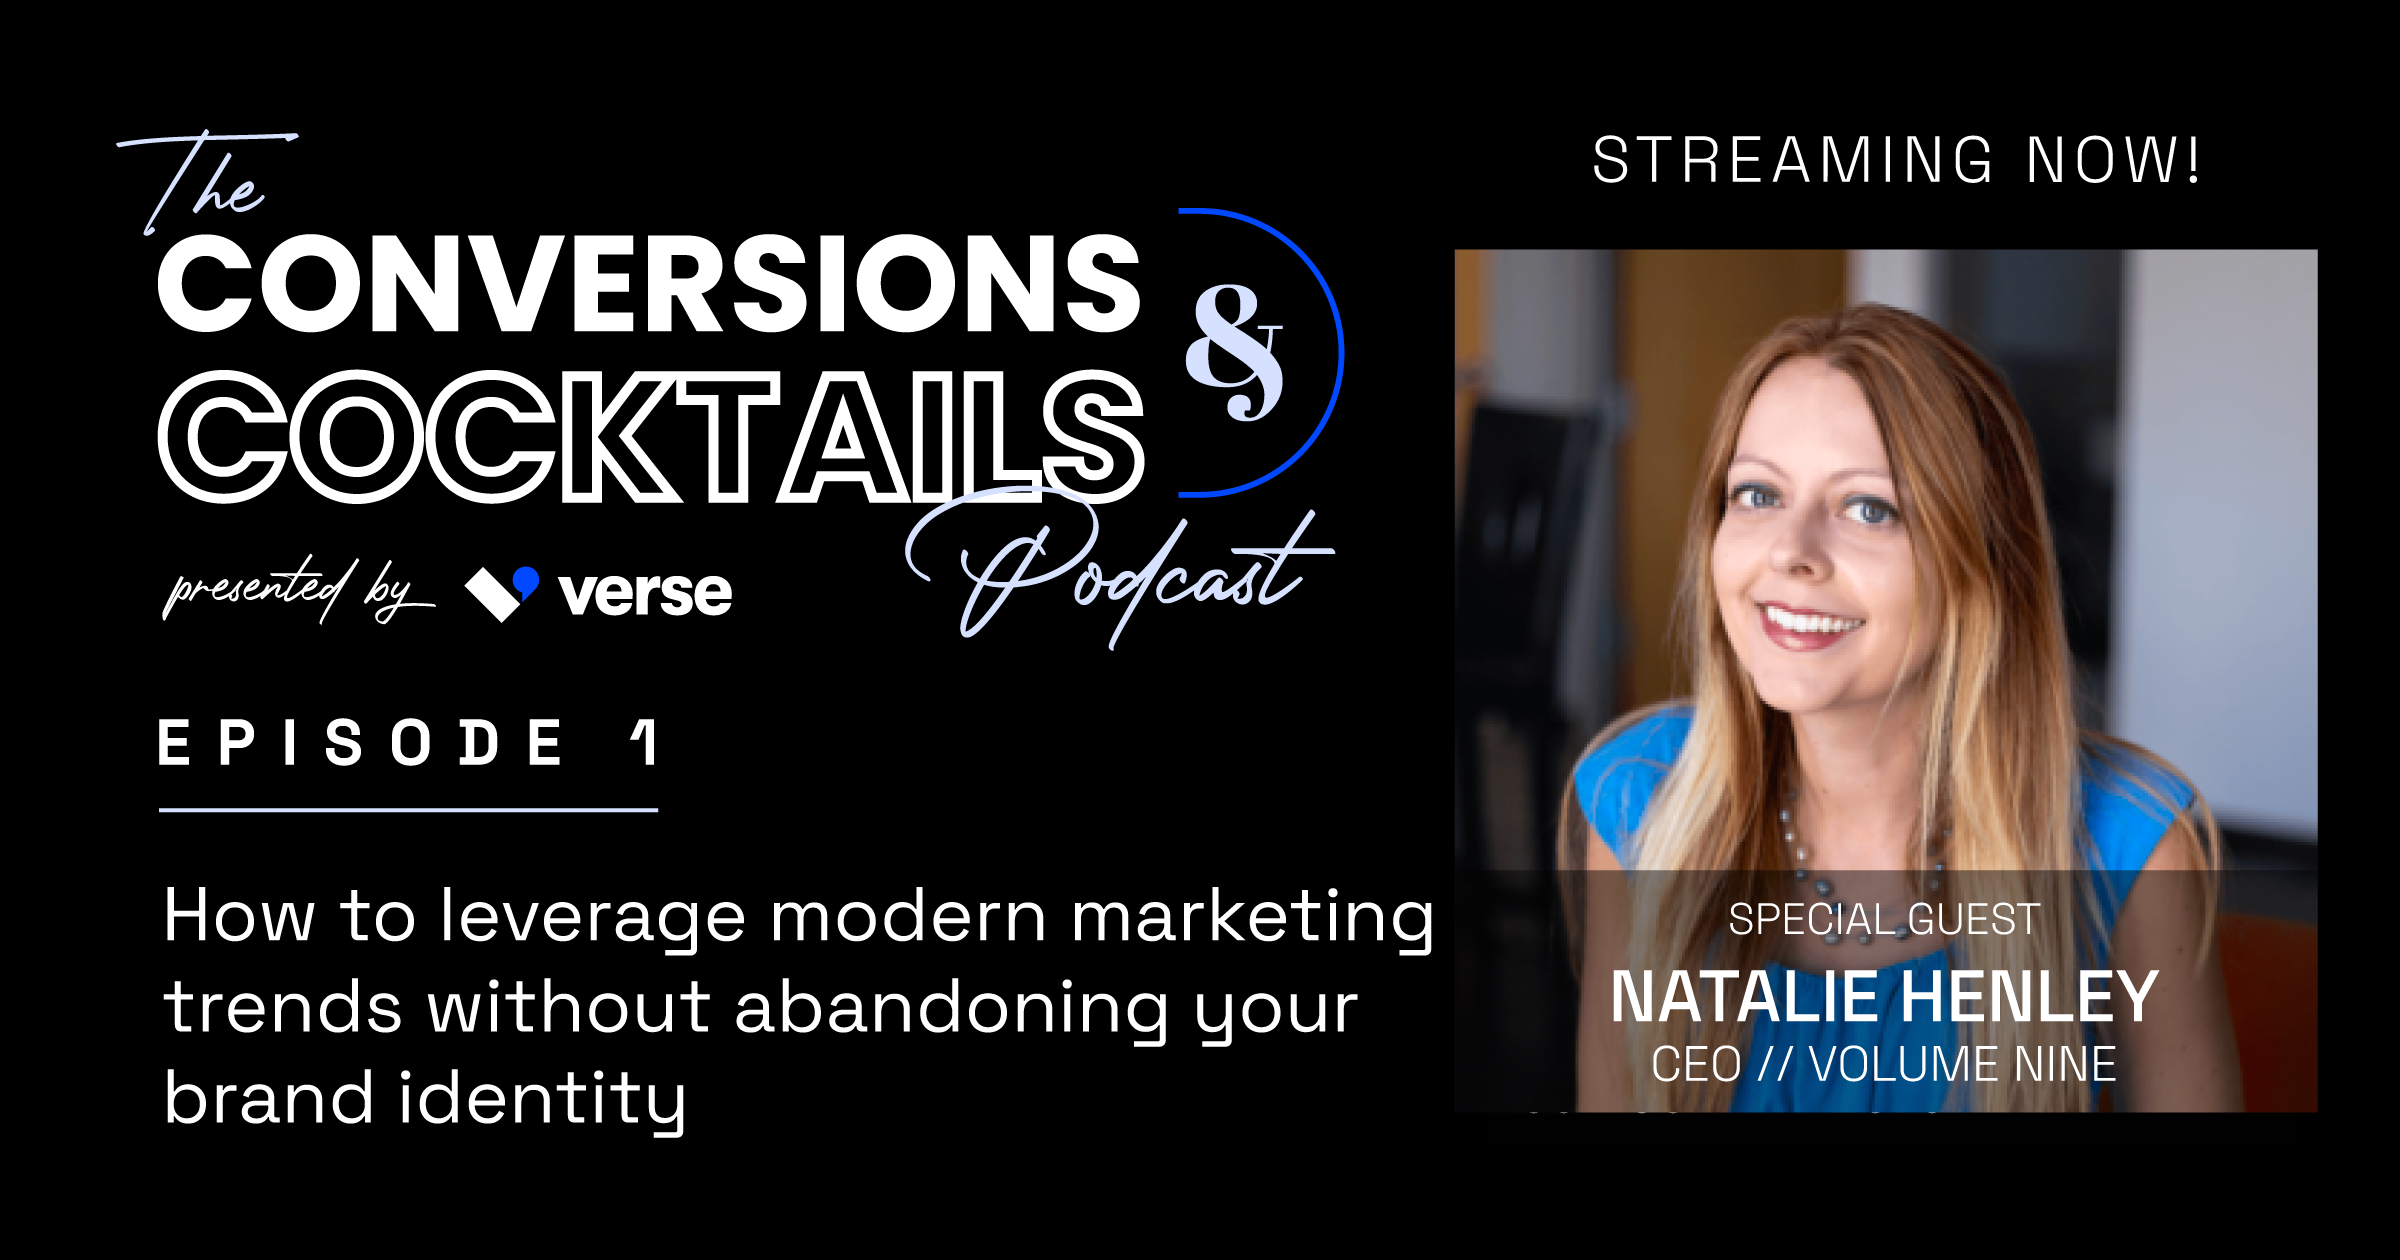 Podcast Episode 1: ﻿How to leverage modern marketing trends without abandoning your brand identity Featured Image